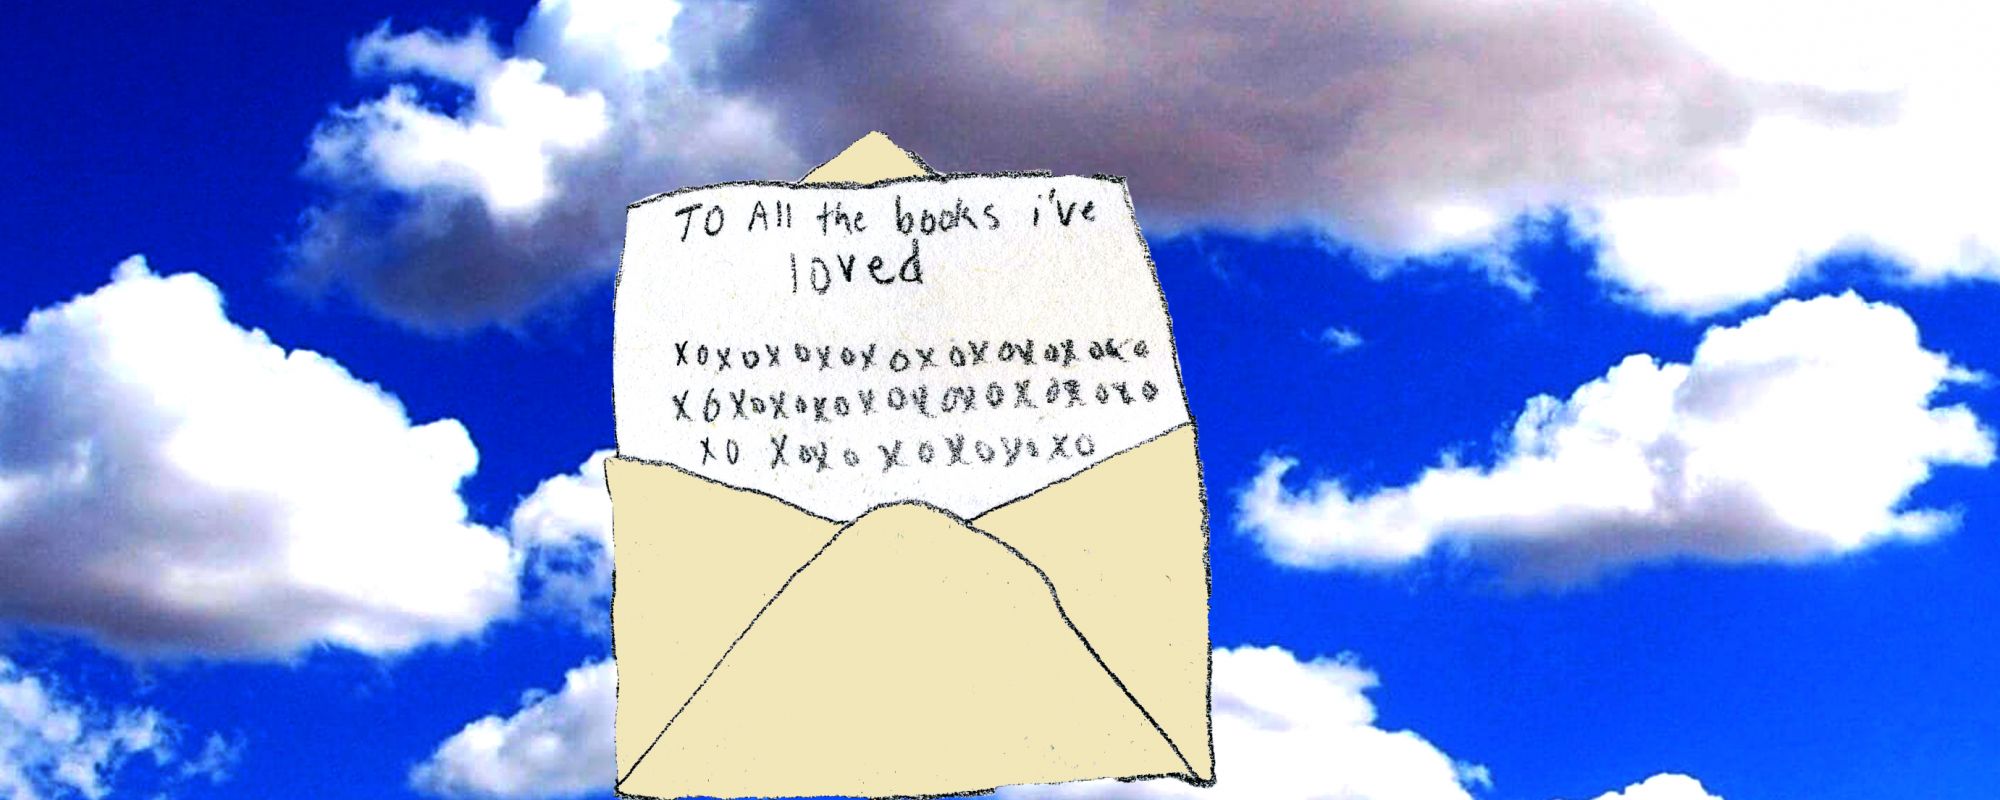 Letter in an envelope surrounded by clothes